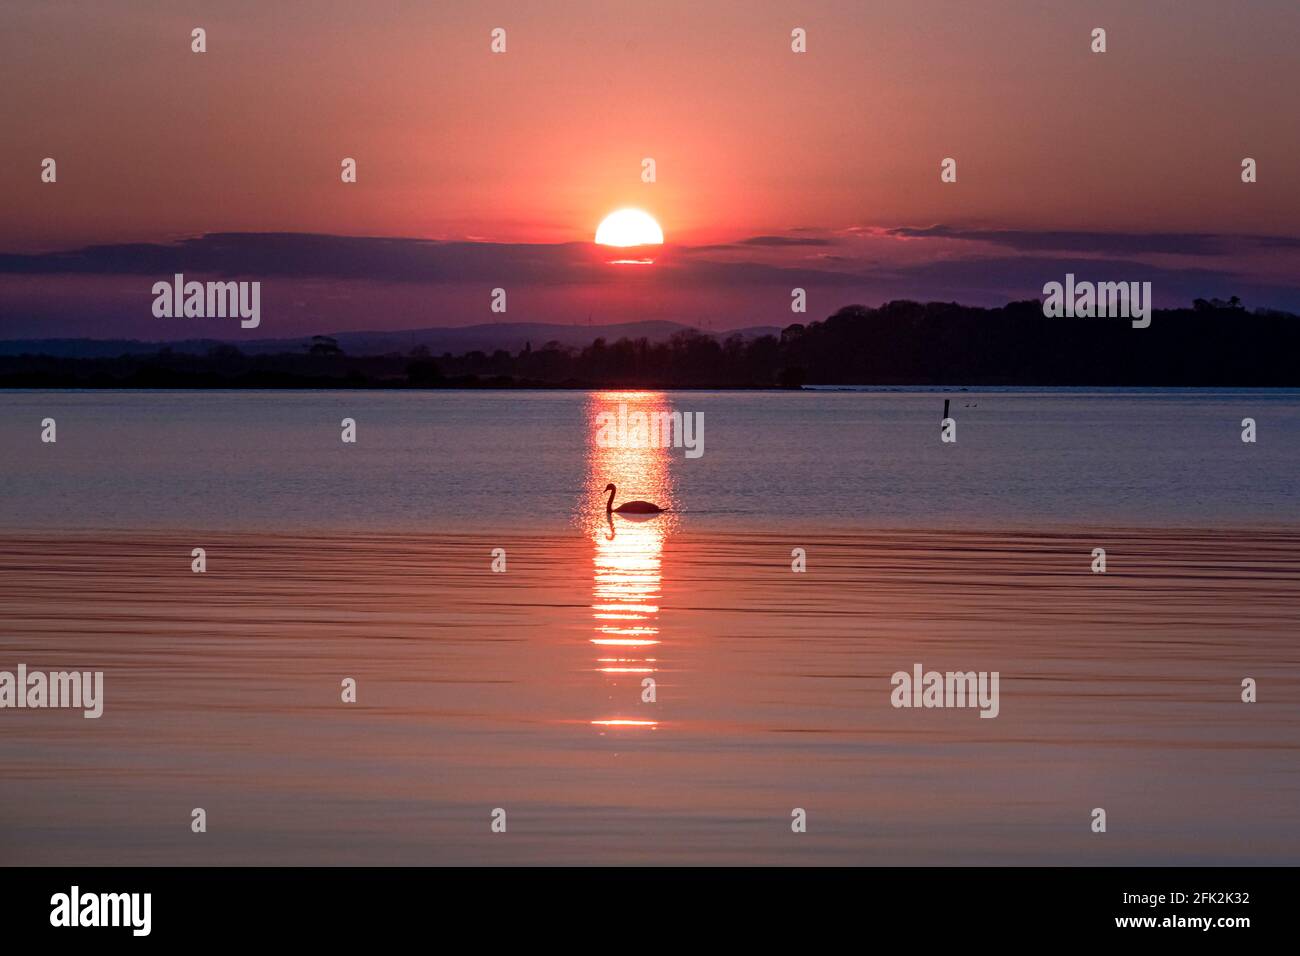 Swan at sunset on Lough Neagh, Armagh, Northern Ireland near Charlestown. Lough Neagh is the largest freshwater lake in Europe. Stock Photo